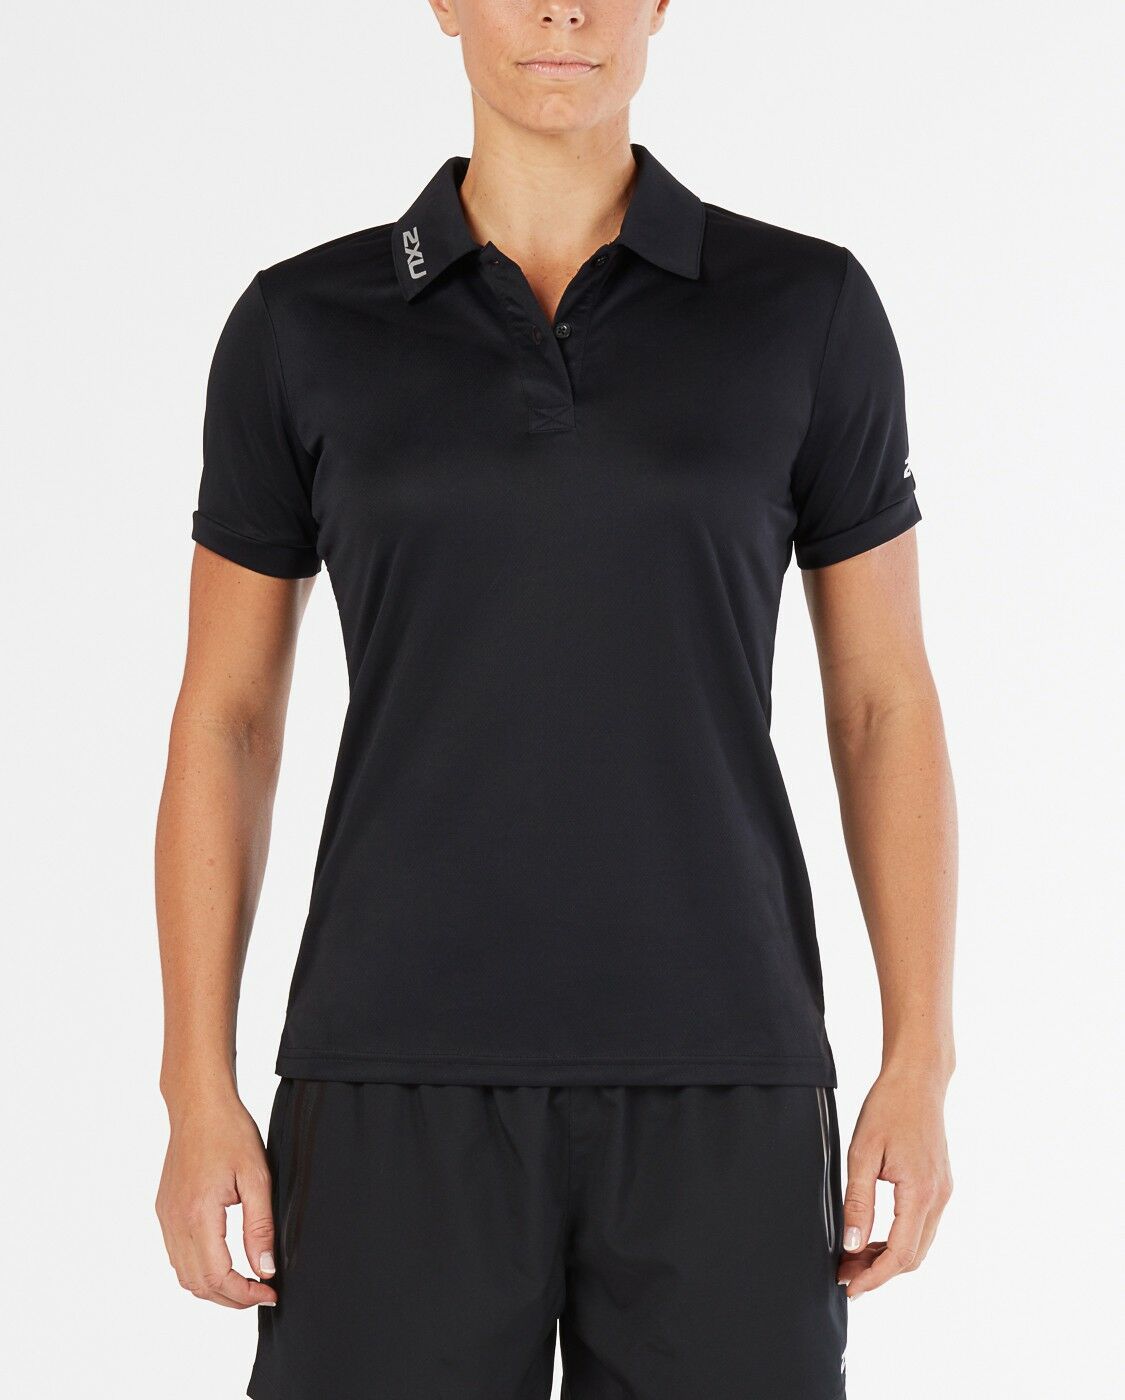 BSR Performance Polo